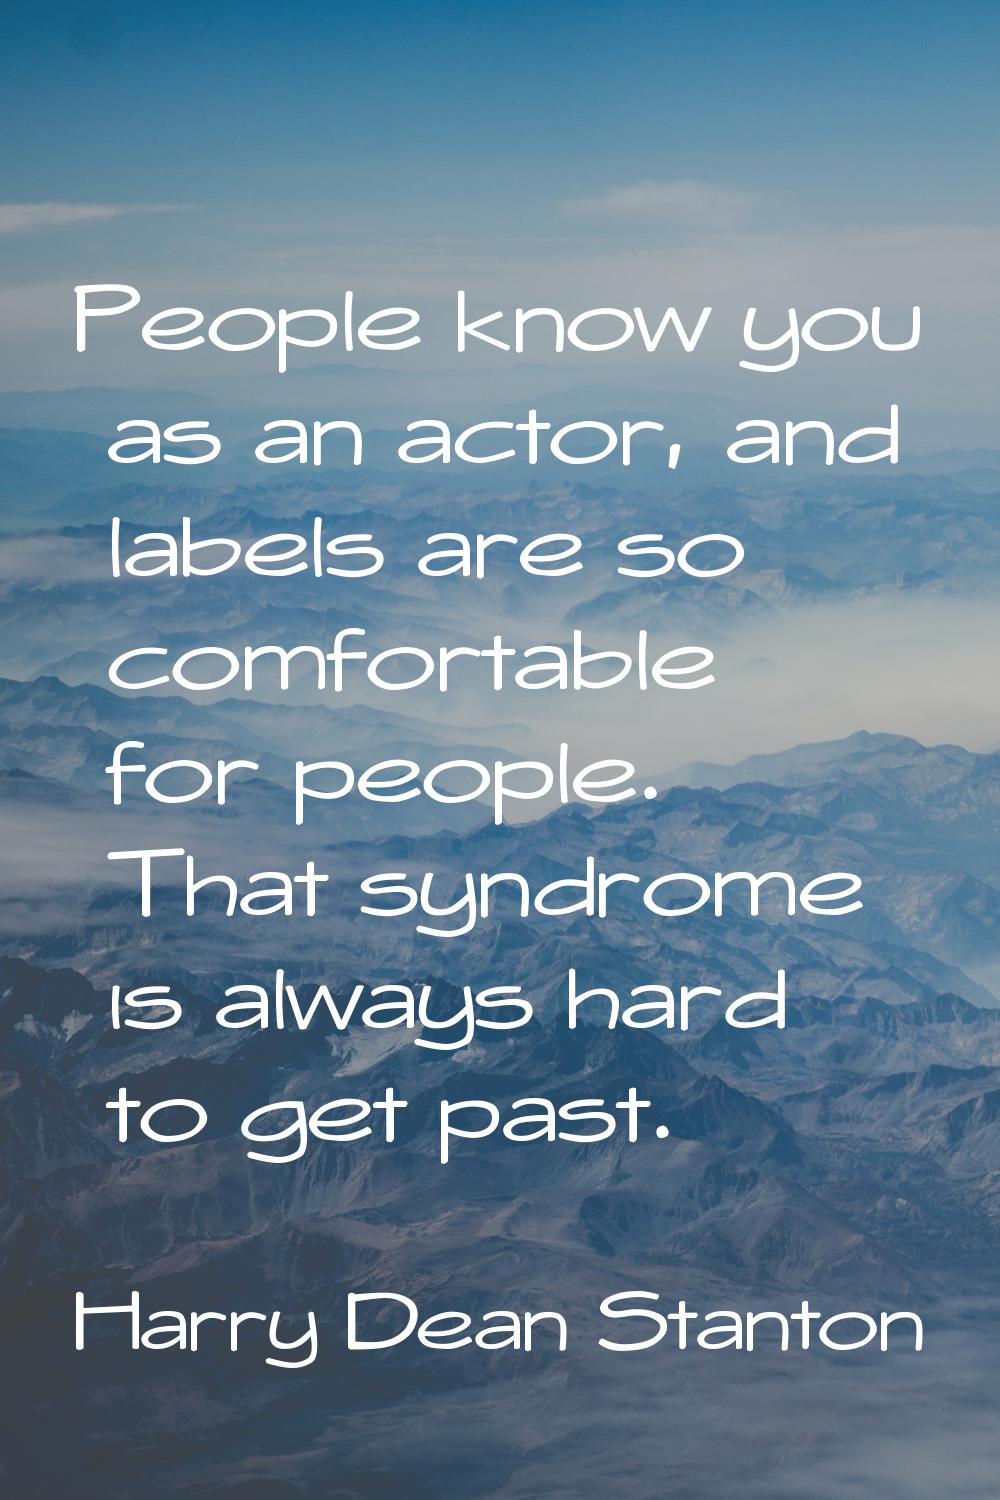 People know you as an actor, and labels are so comfortable for people. That syndrome is always hard